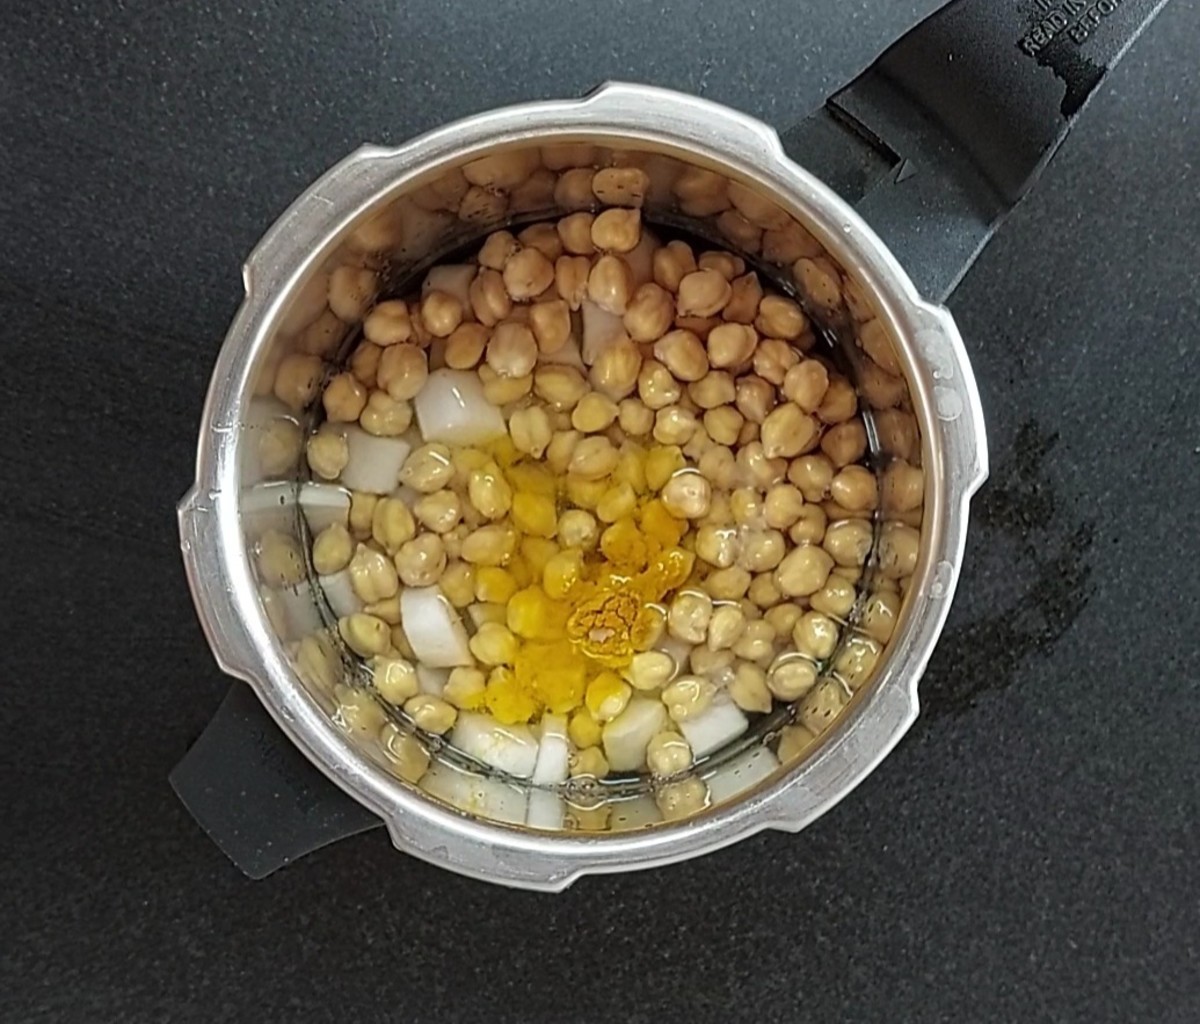 Drain water from 1 cup of soaked chana (soaked overnight), transfer to the cooker, add 1/2 teaspoon turmeric powder, salt to taste and 2 cups of water. Close the lid and take 3 whistles. Let the pressure subside naturally.